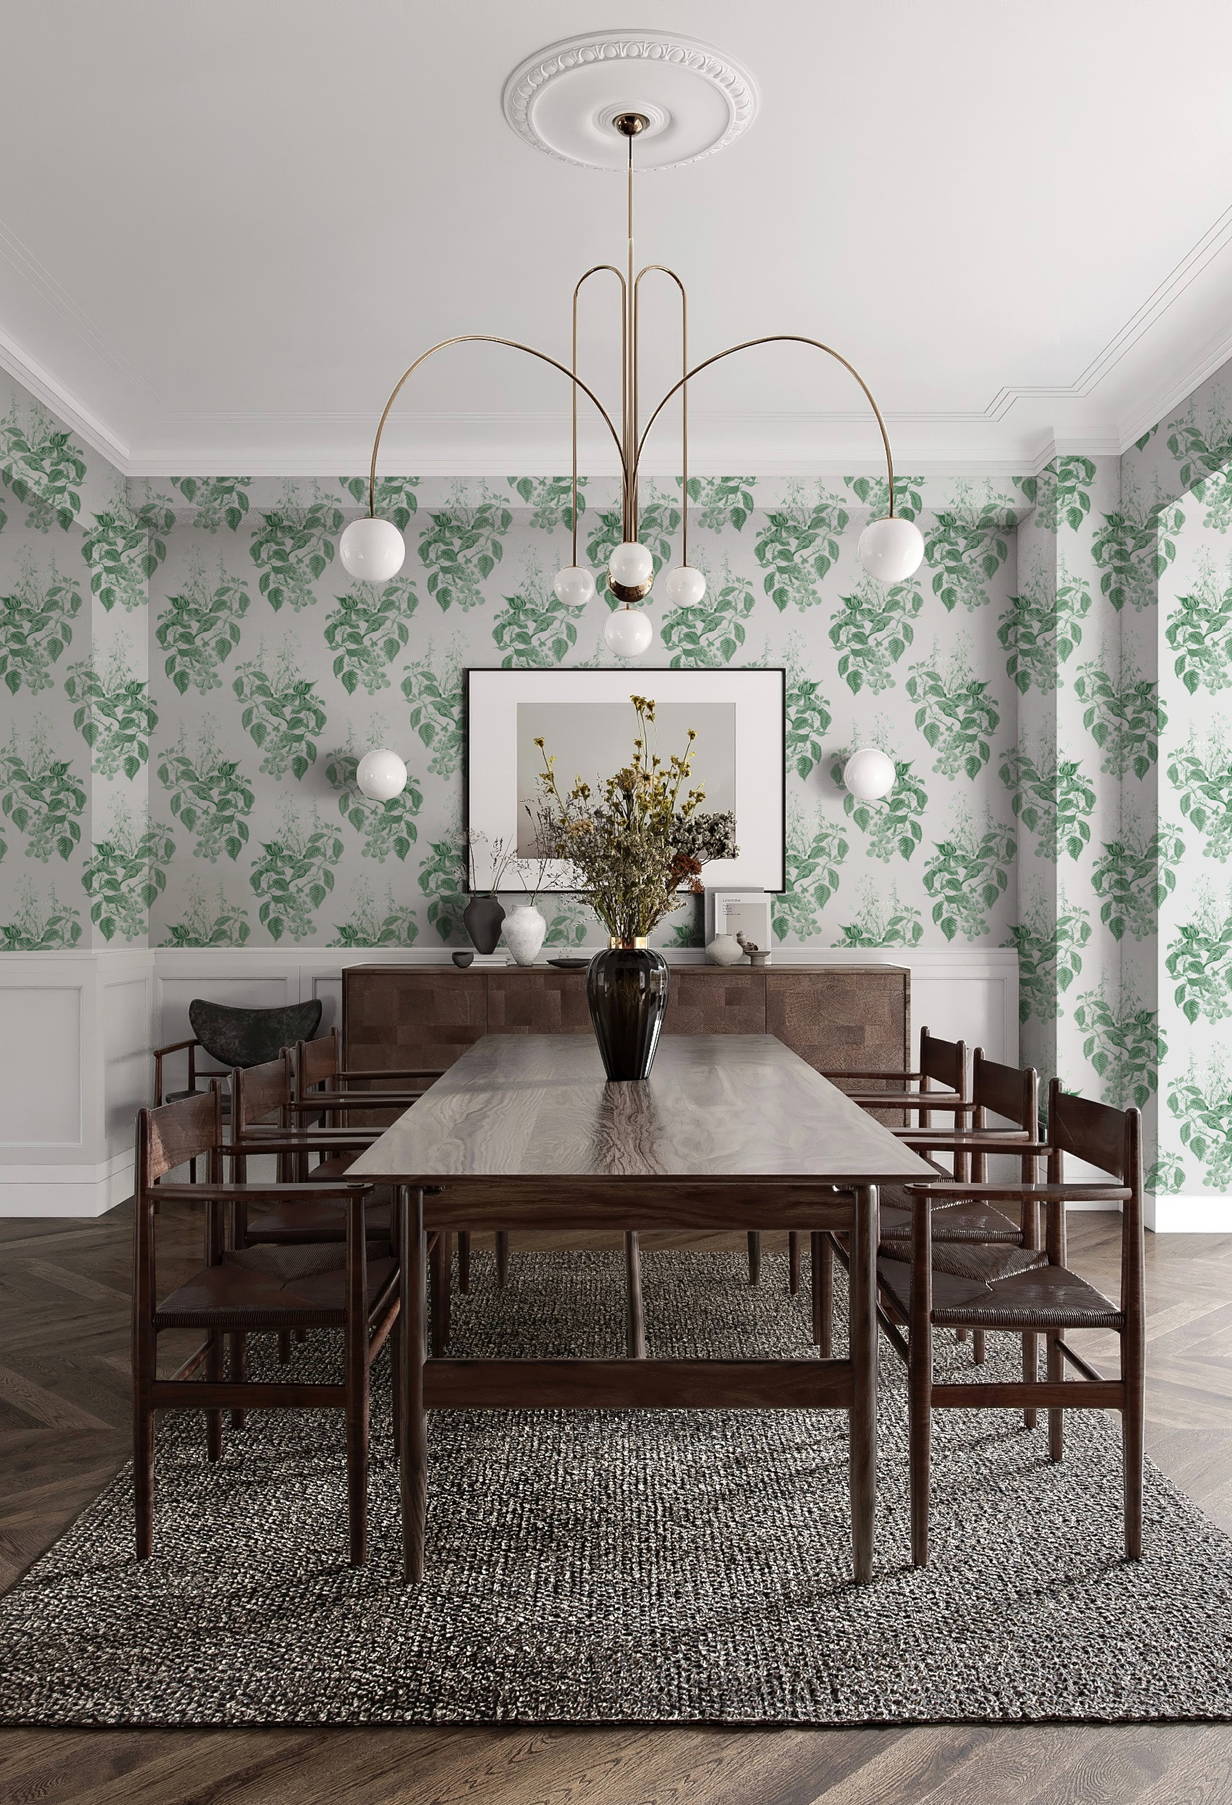 dues-ex-gardenia-Aviary-Isle-Wallpaper-Leaf-green-wallcovering-dining-room